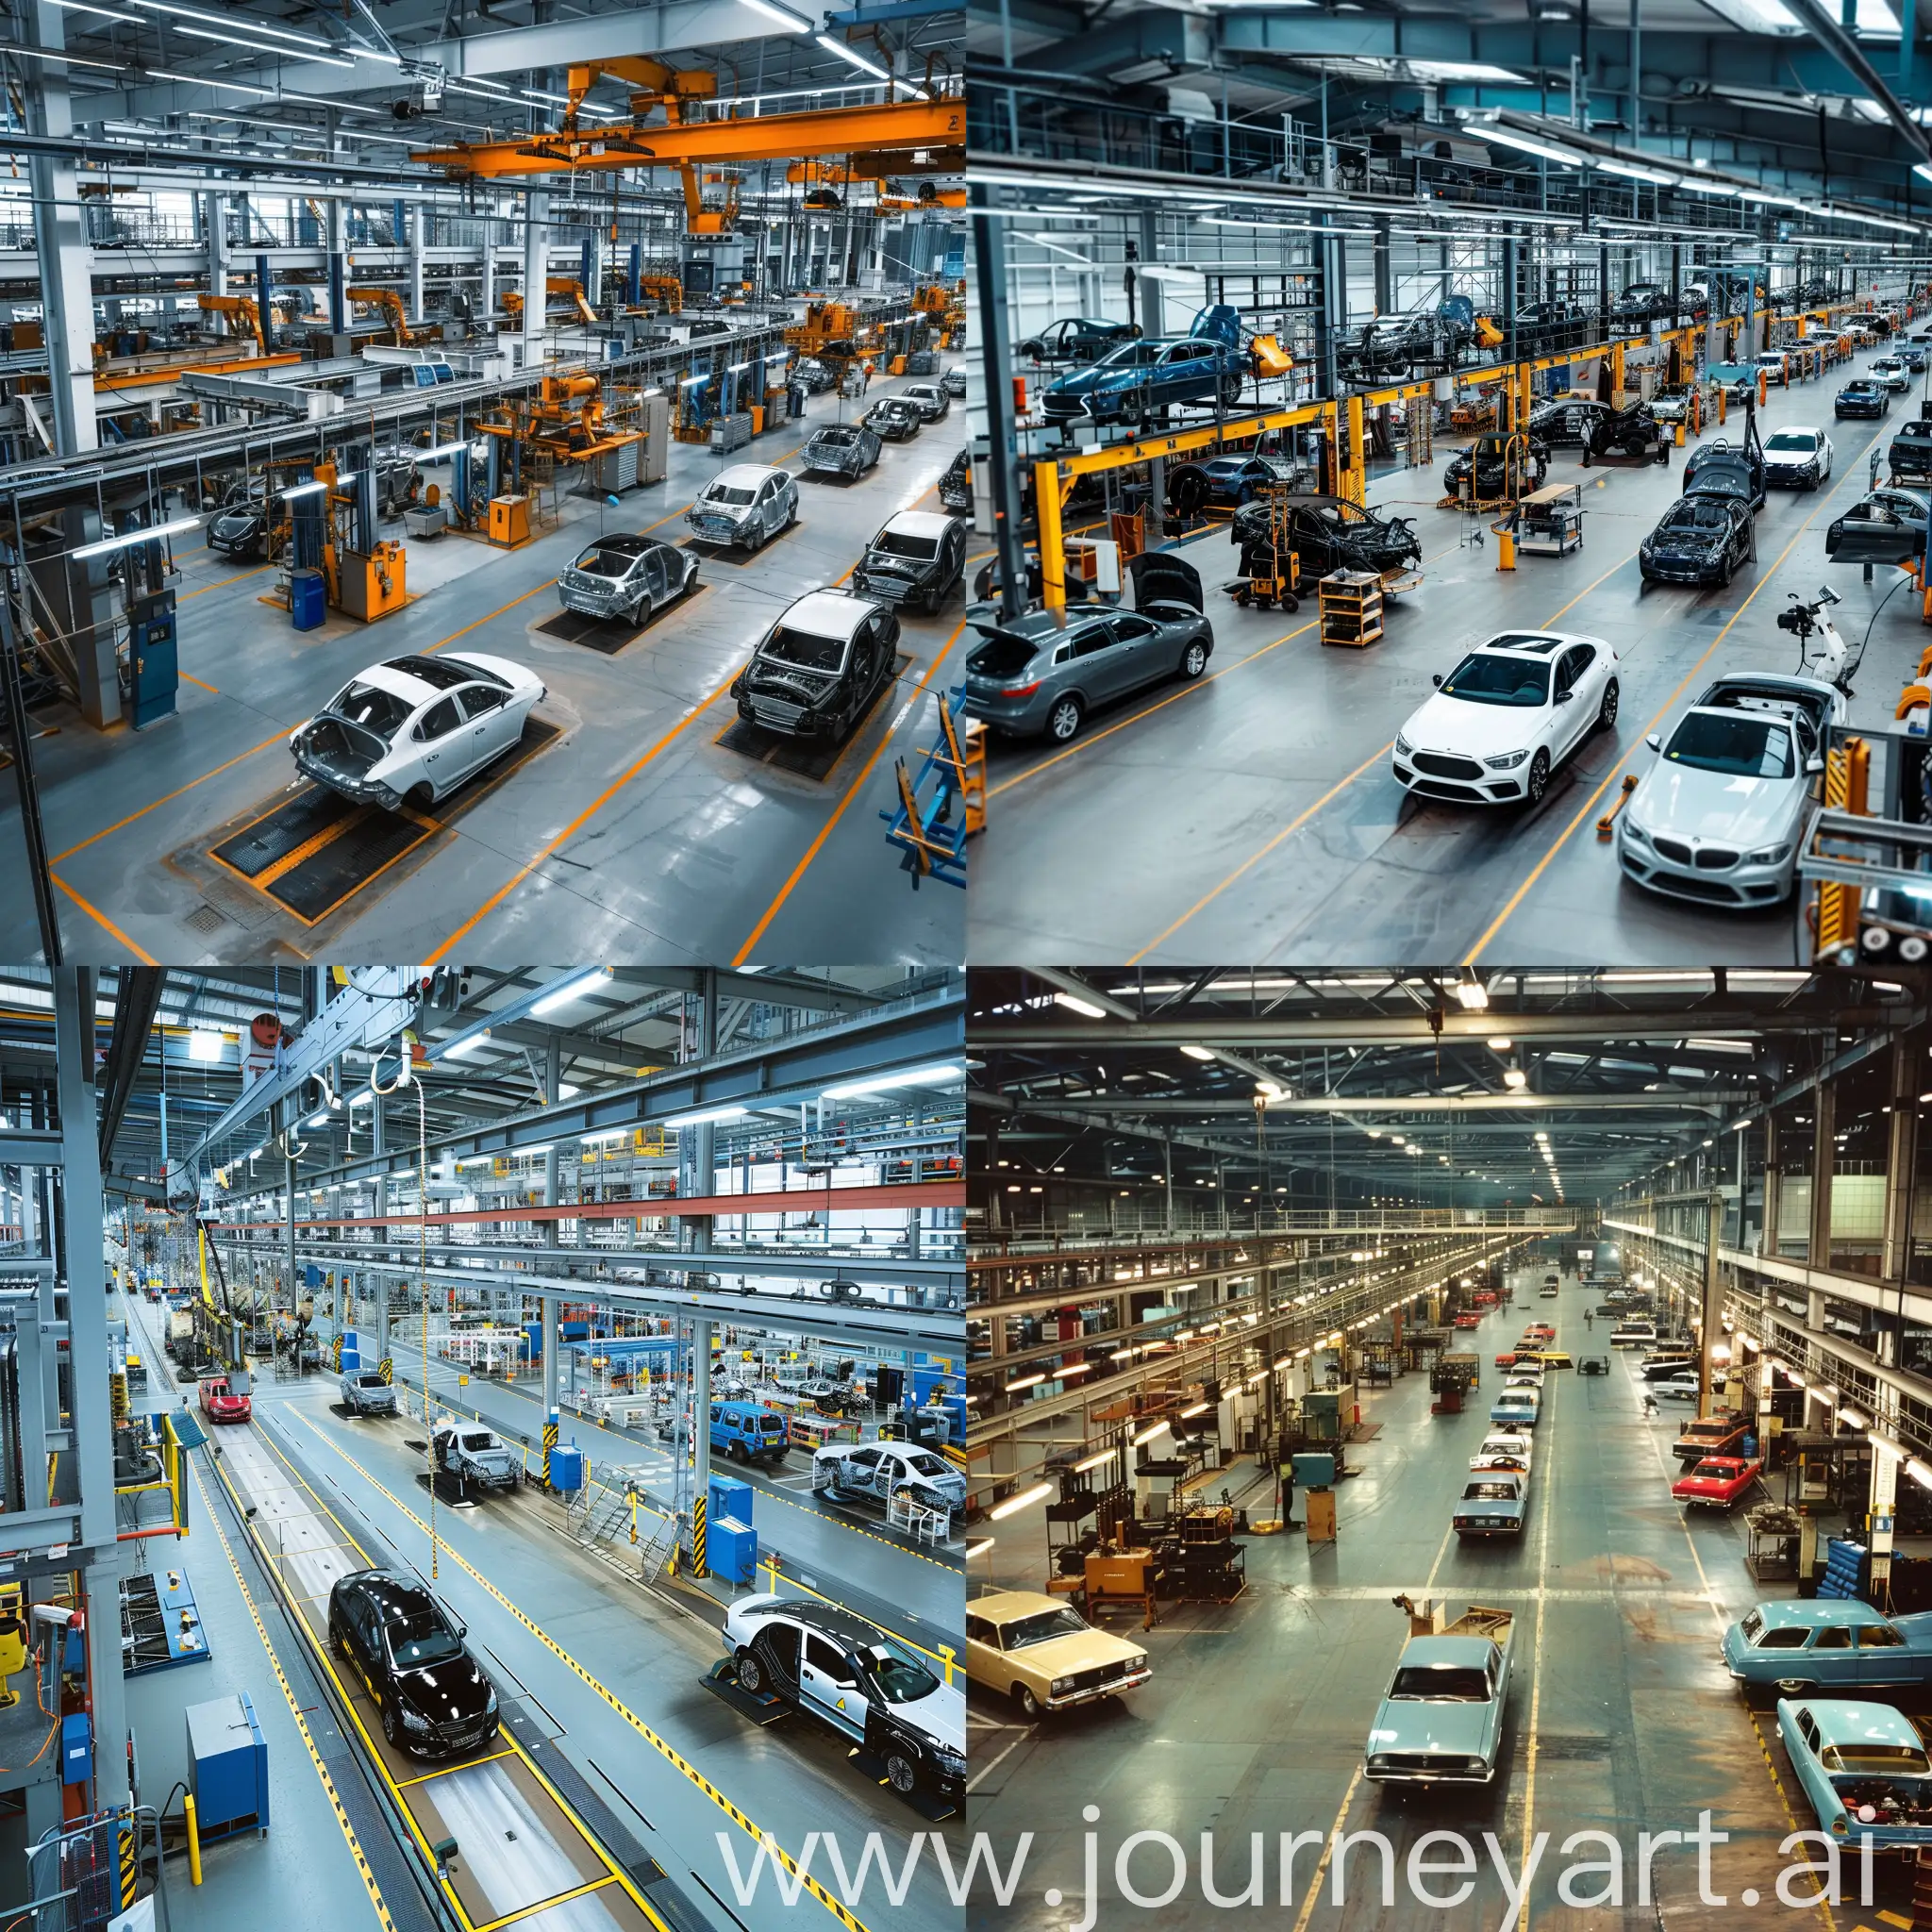 Automobile-Manufacturing-Workshop-Production-Line-in-Action